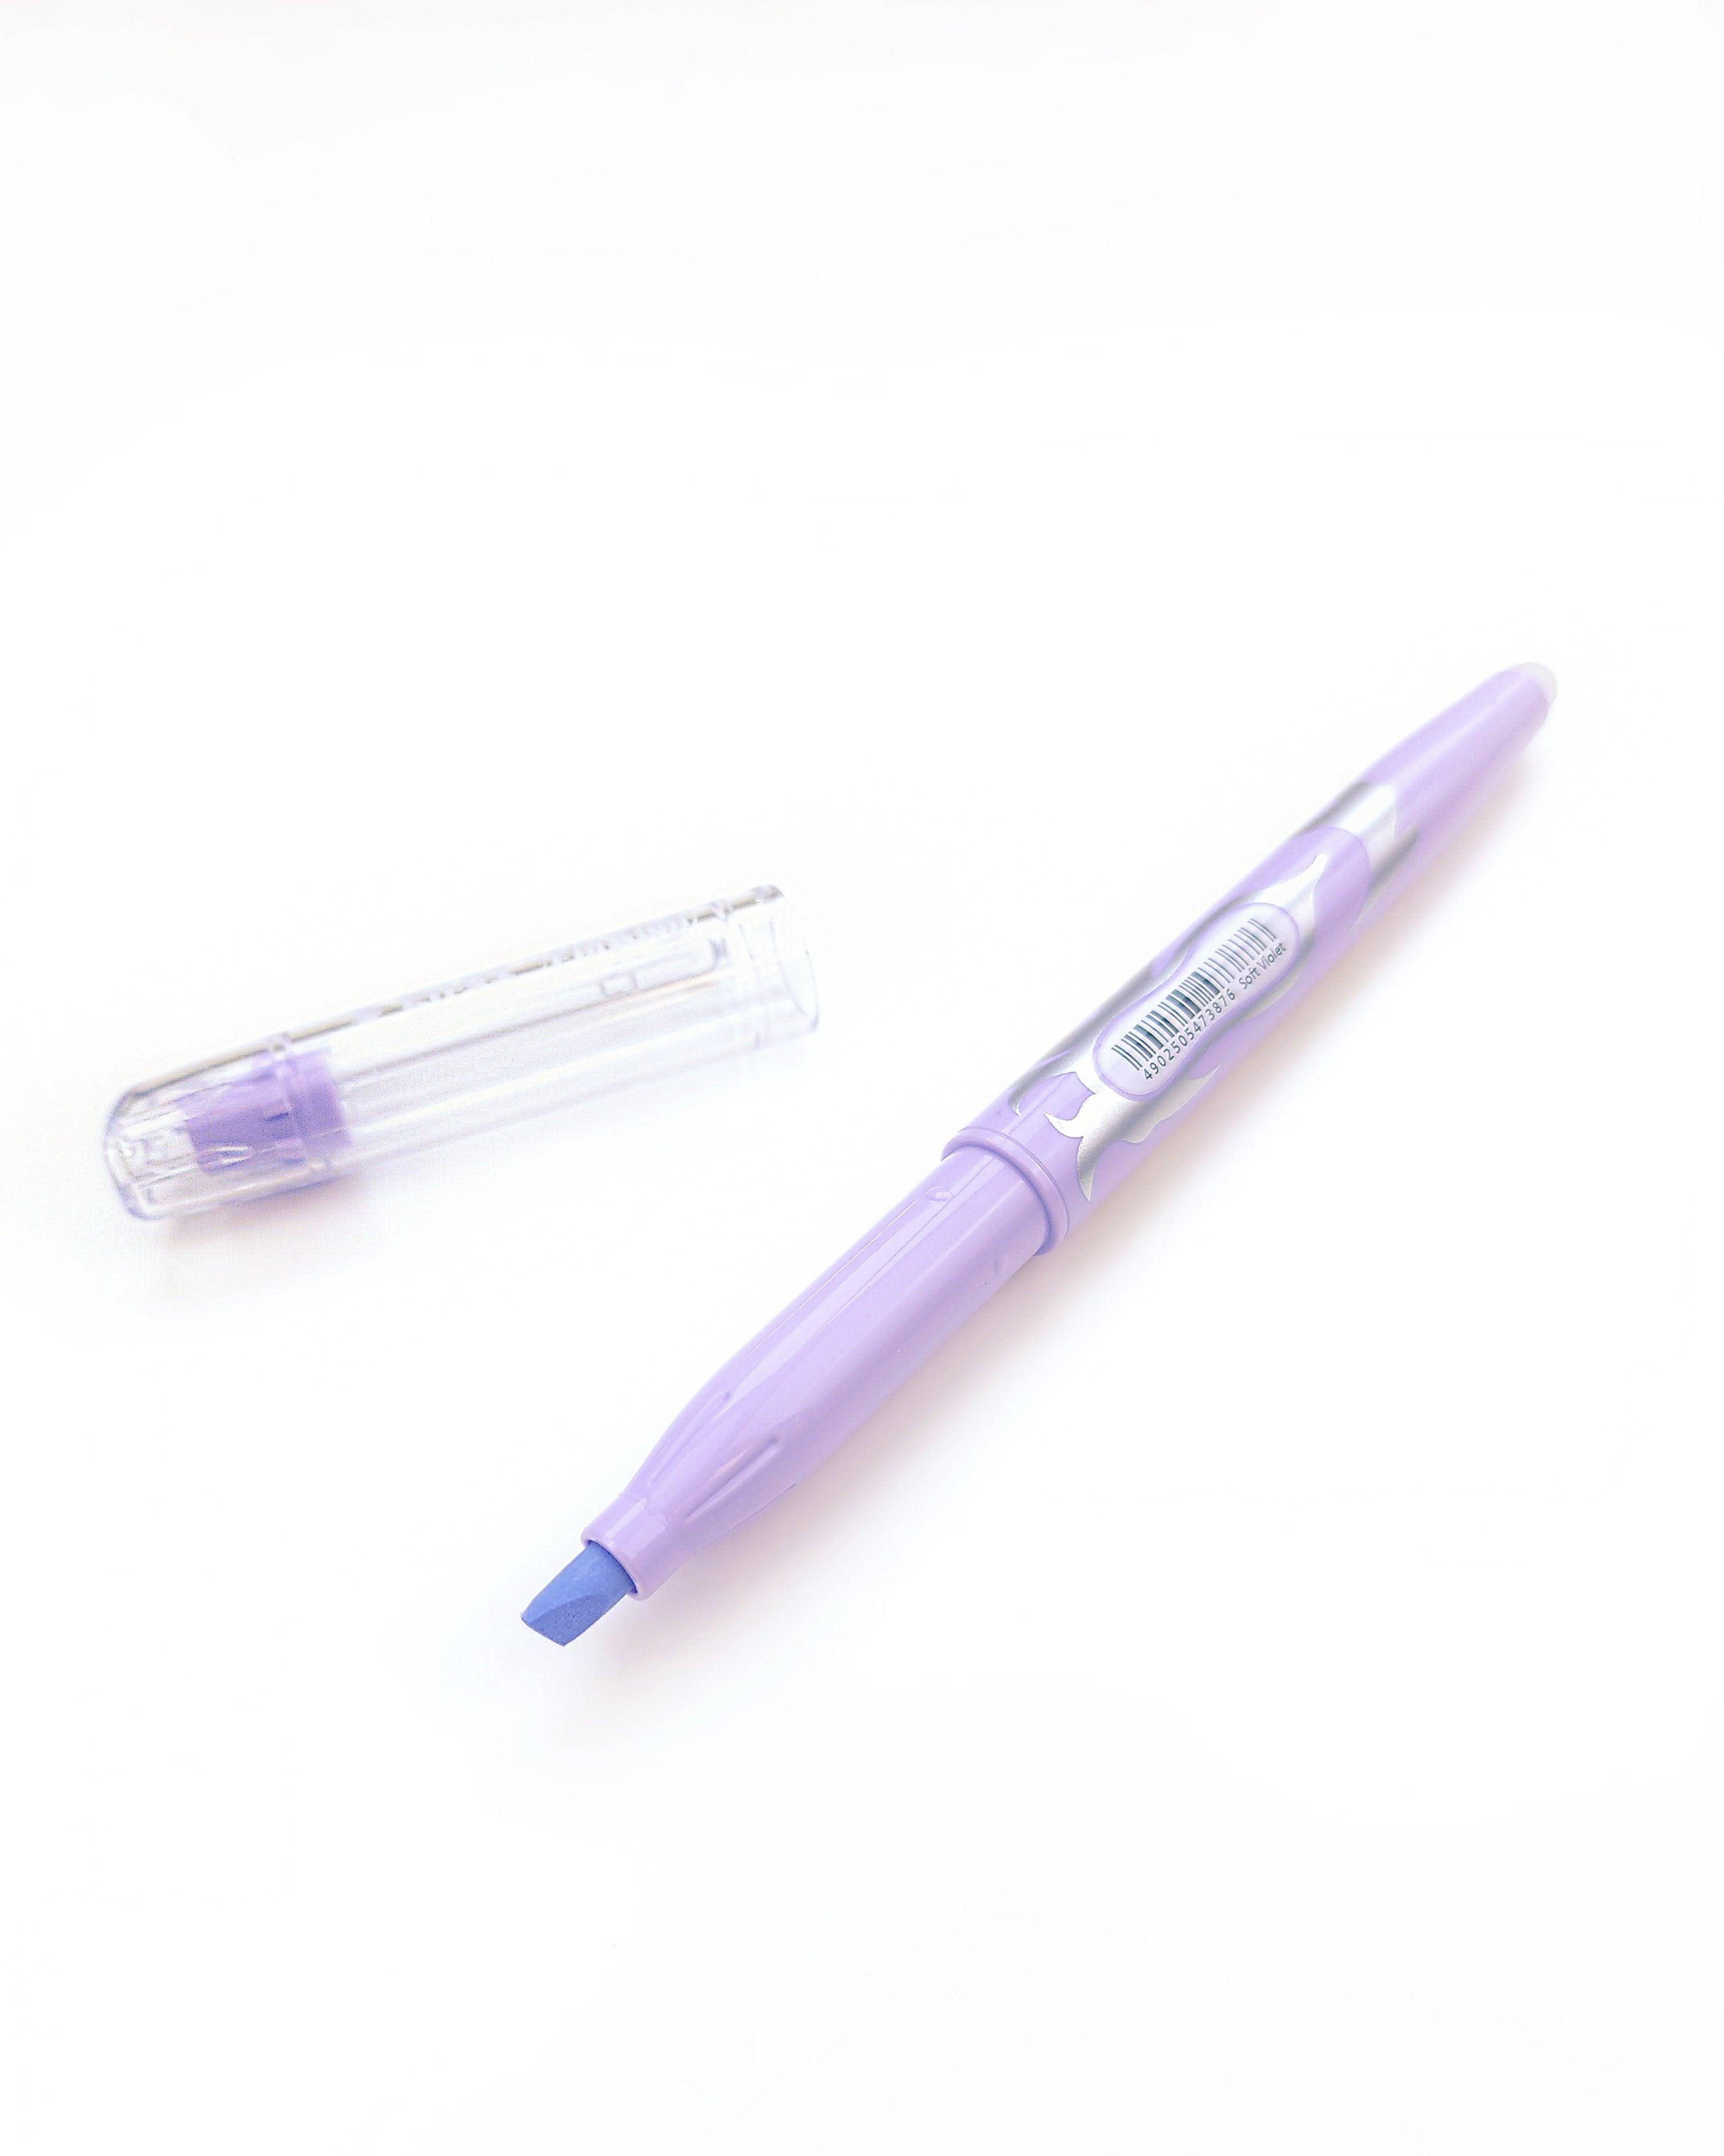 Soft violet Frixion erasable highlighter marker for note taking and editing in your six ring or discbound planner by Jane's Agenda.